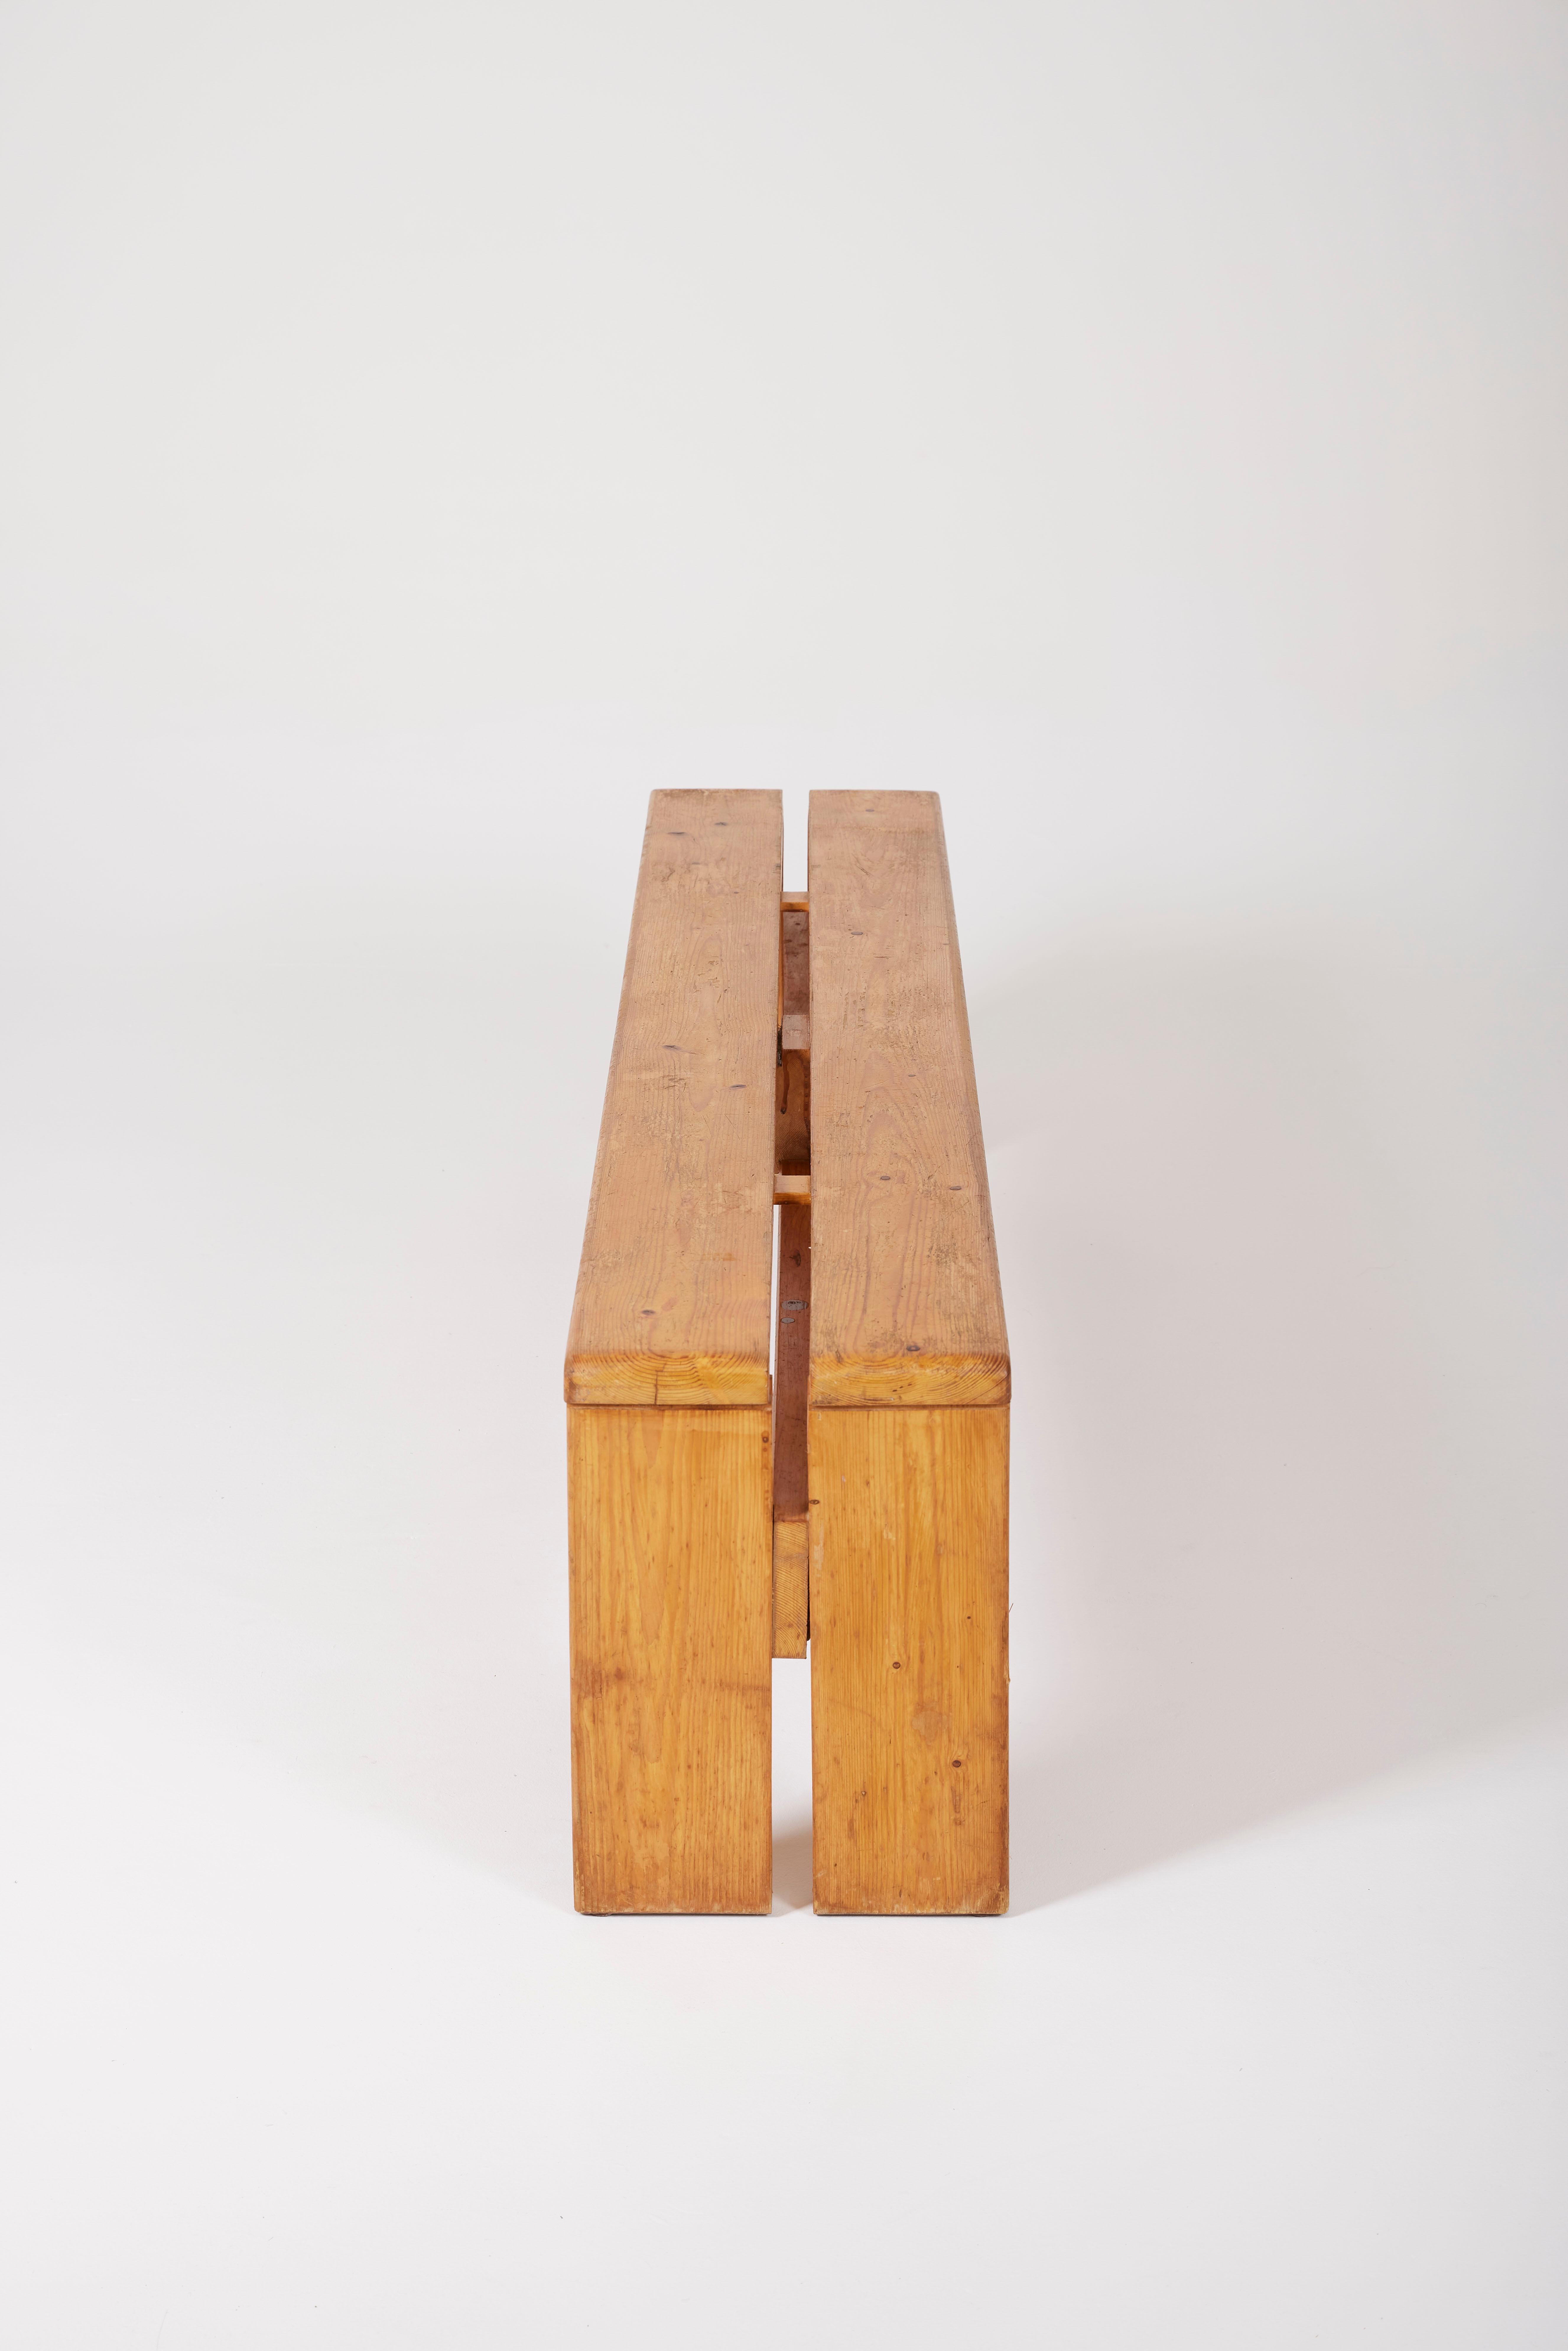 Charlotte Perriand wooden bench In Good Condition For Sale In PARIS, FR